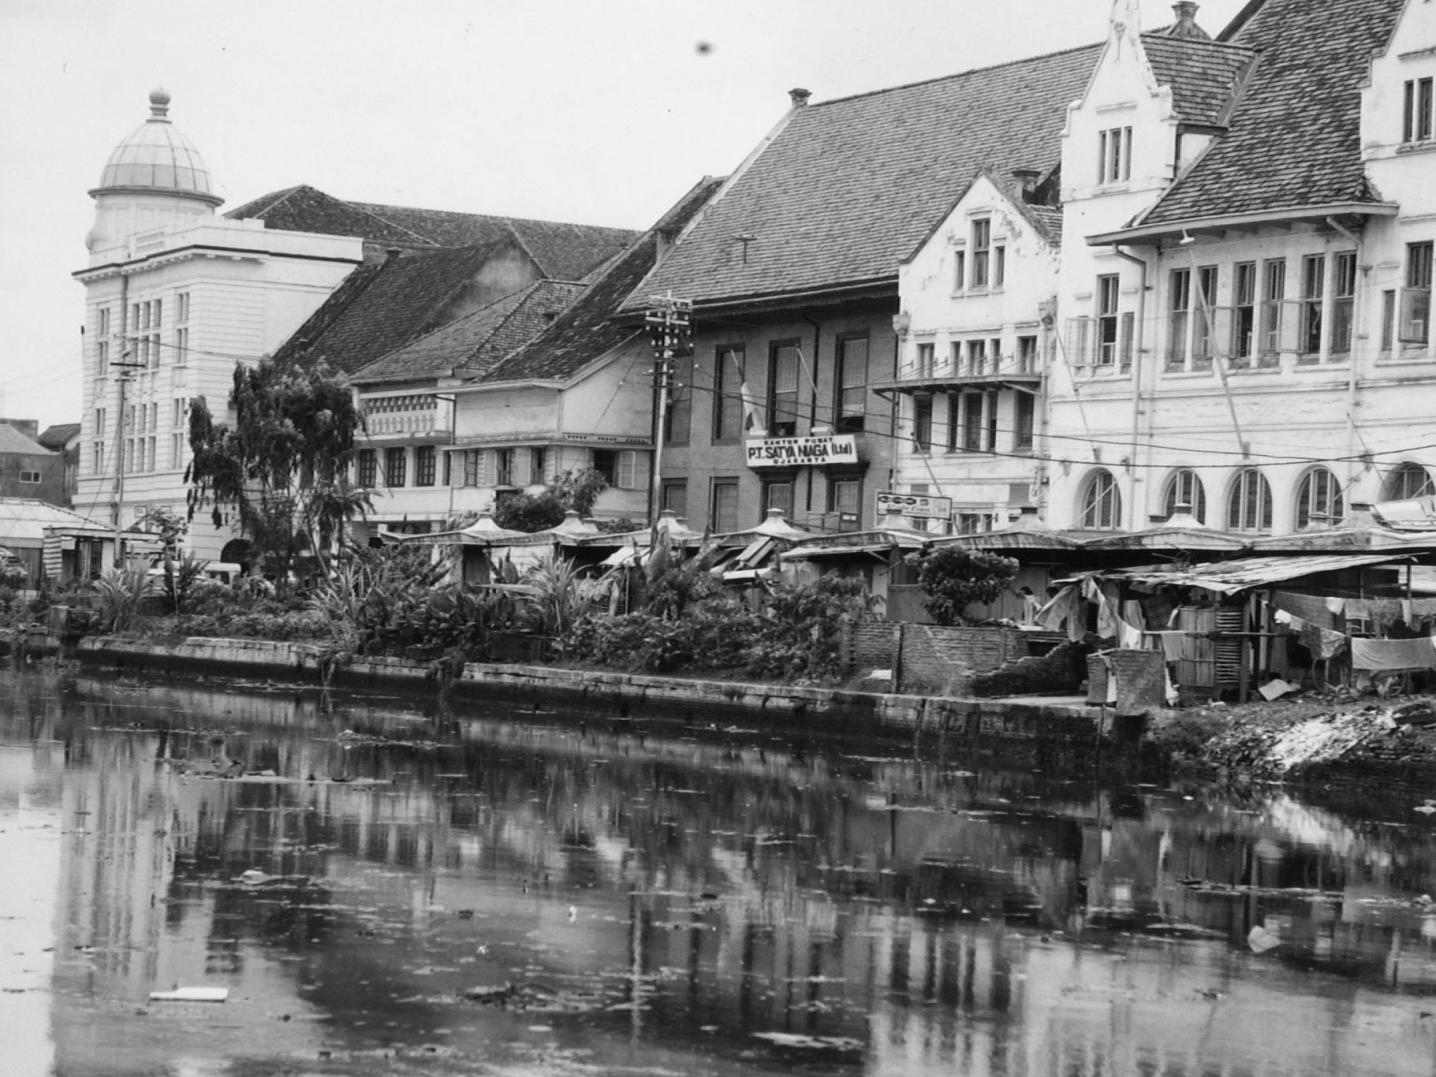 a view on derelict colonial buildings along the Kali Besar in Kota Tua, Jakarta in 1971